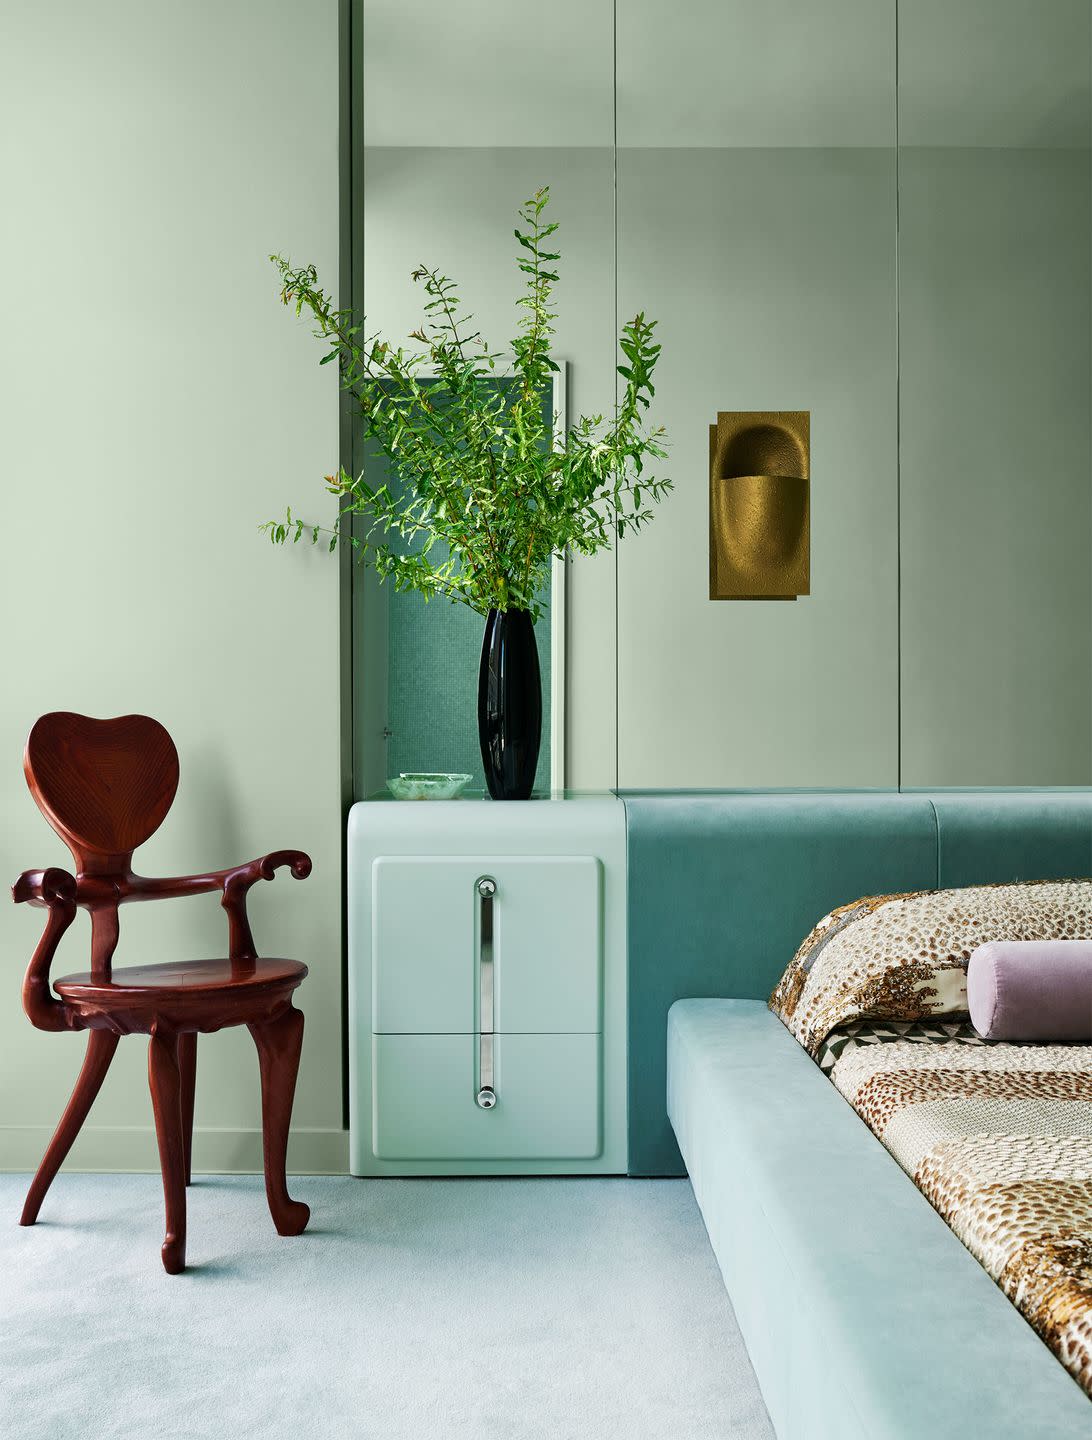 a bedroom has mint green walls, a mirrored wall behind a bed upholstered in a light aqua velvet and a light green nightstand, bronze sconce, an oak armchair with a heart shaped back, mint green carpet